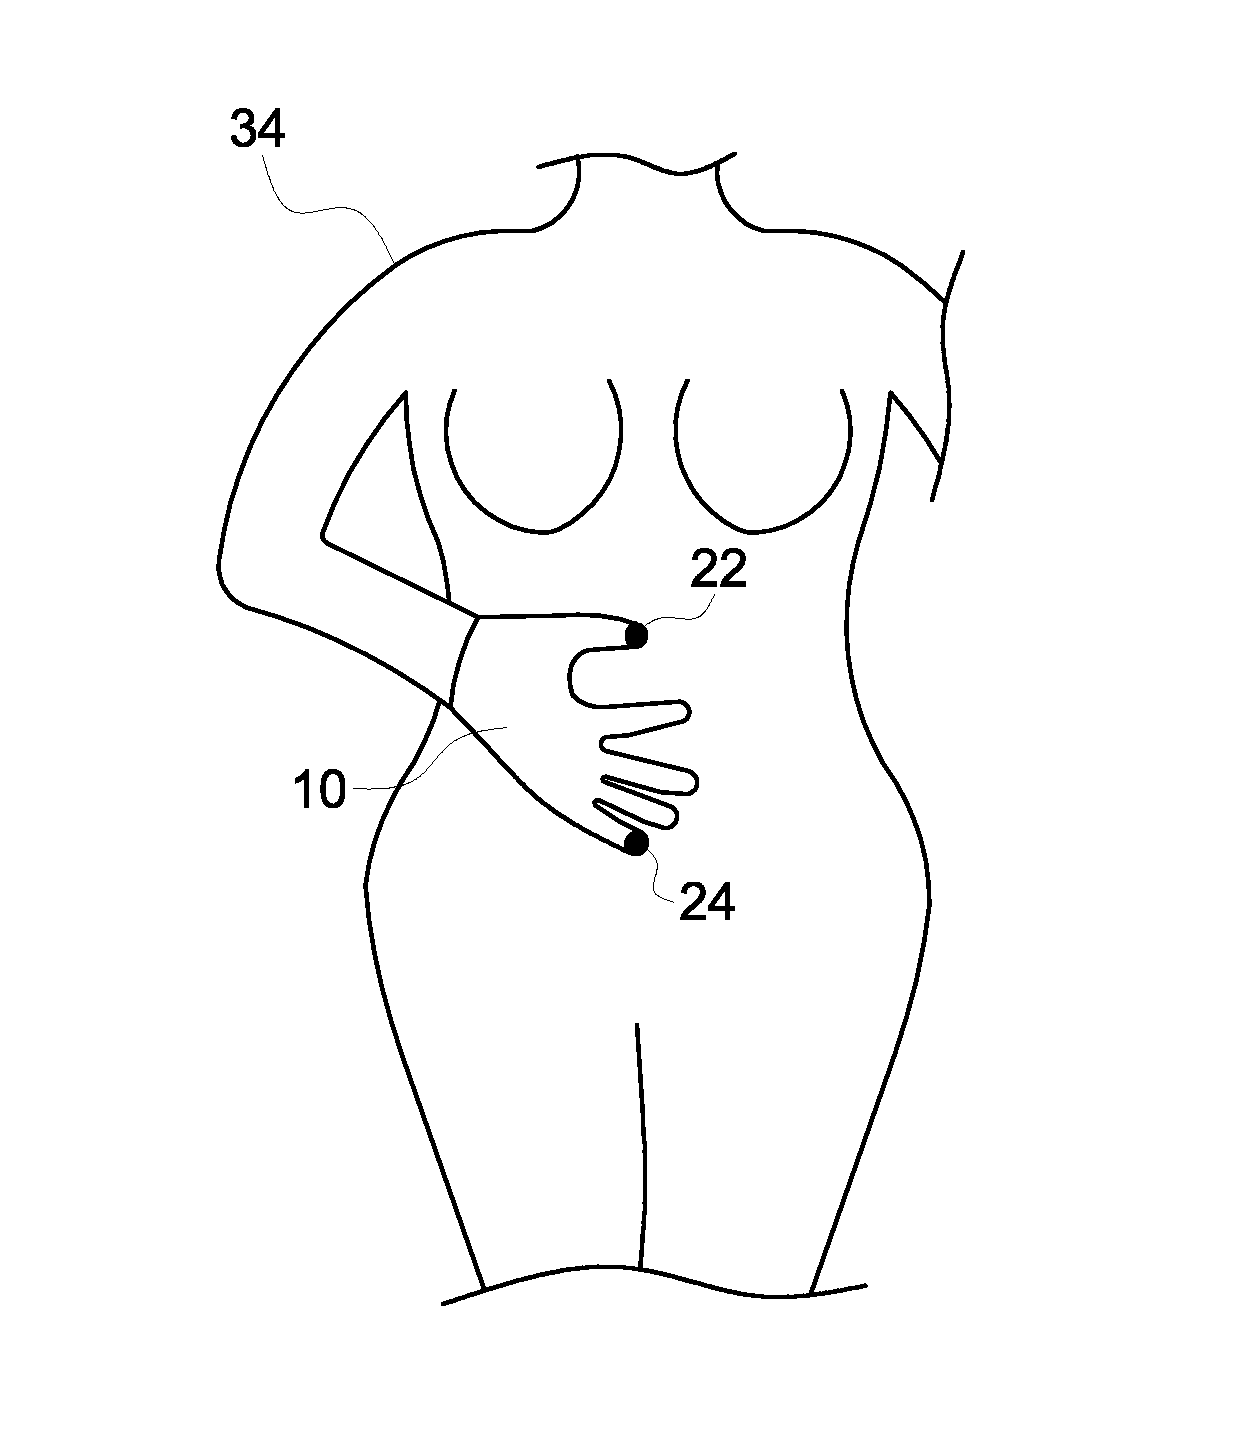 Fetal Monitoring Device and Method